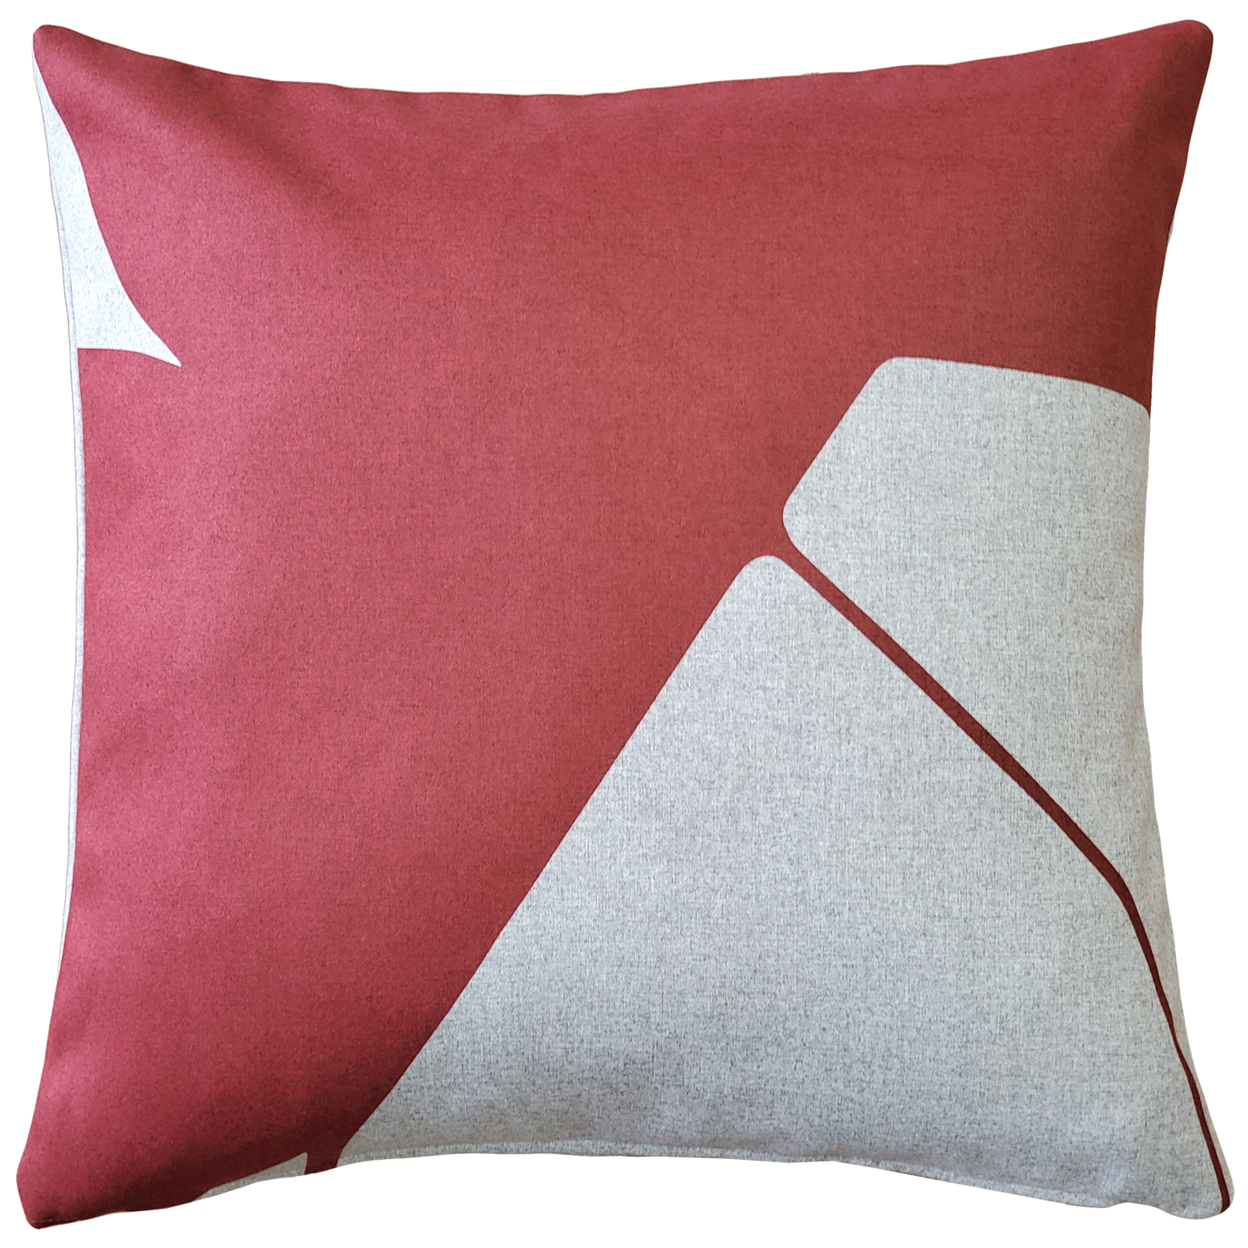 Boketto Spanish Red Throw Pillow 19x19 Inches Square, Complete Pillow with Polyfill Pillow Insert